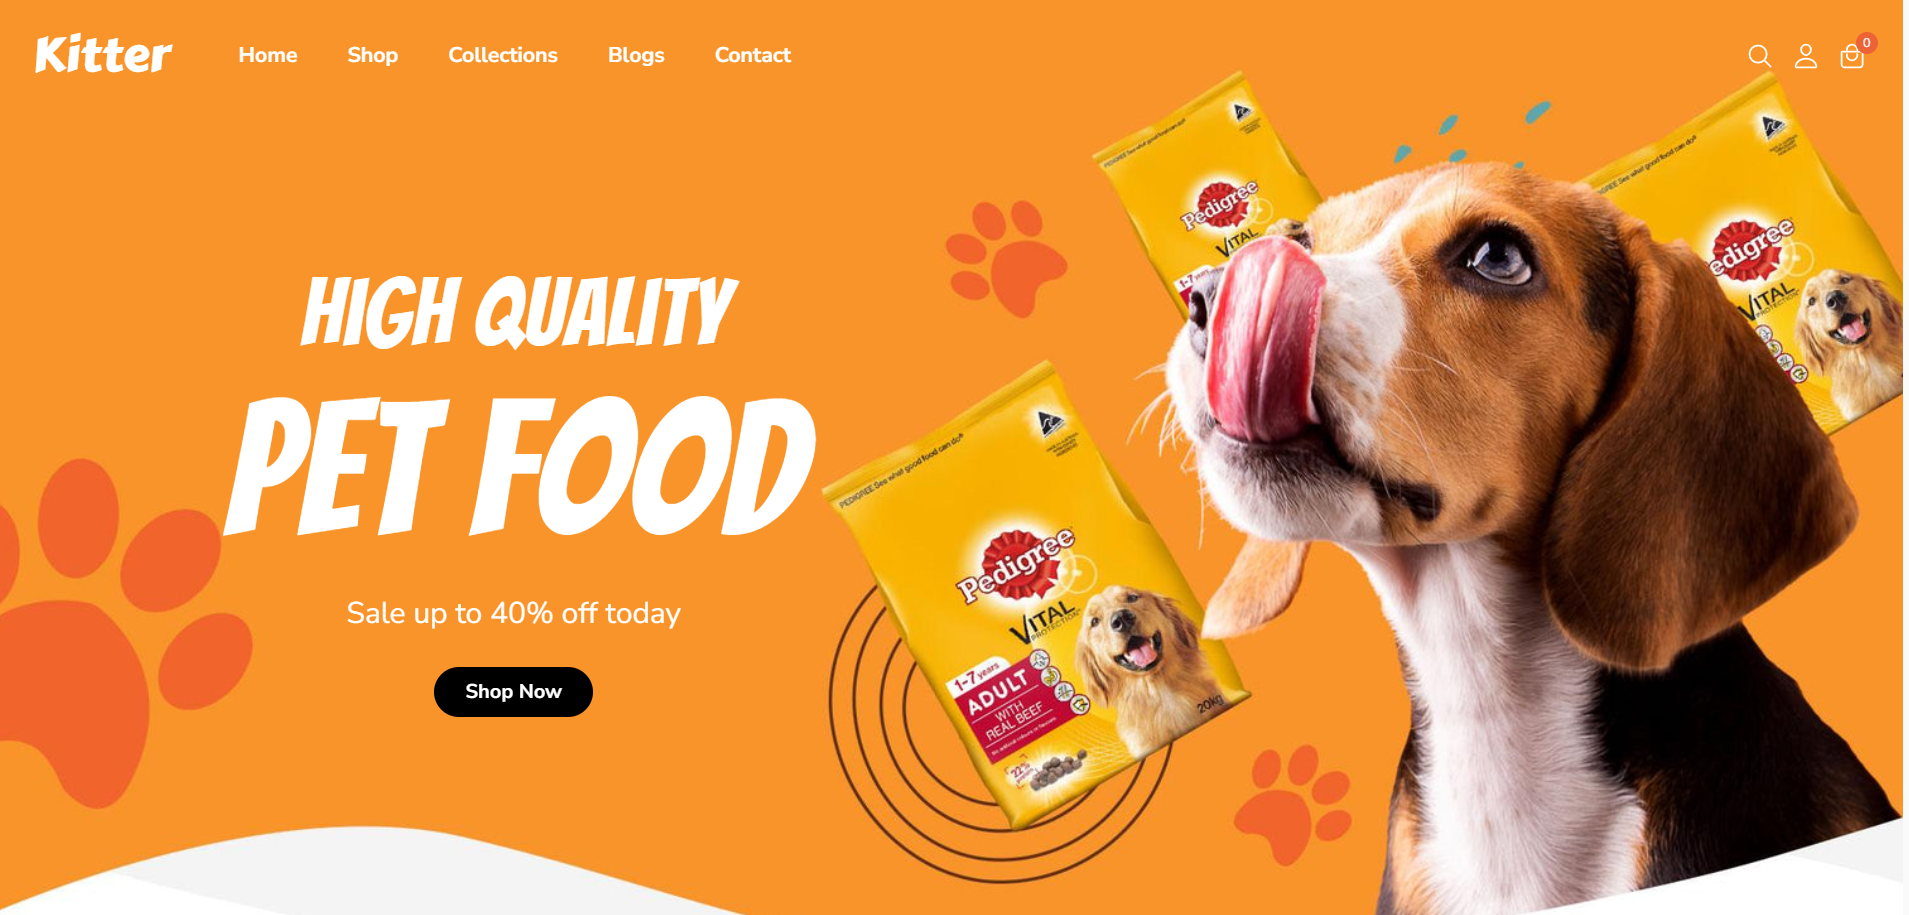 Pet Food Shop Ecommerce Template in Angular 16